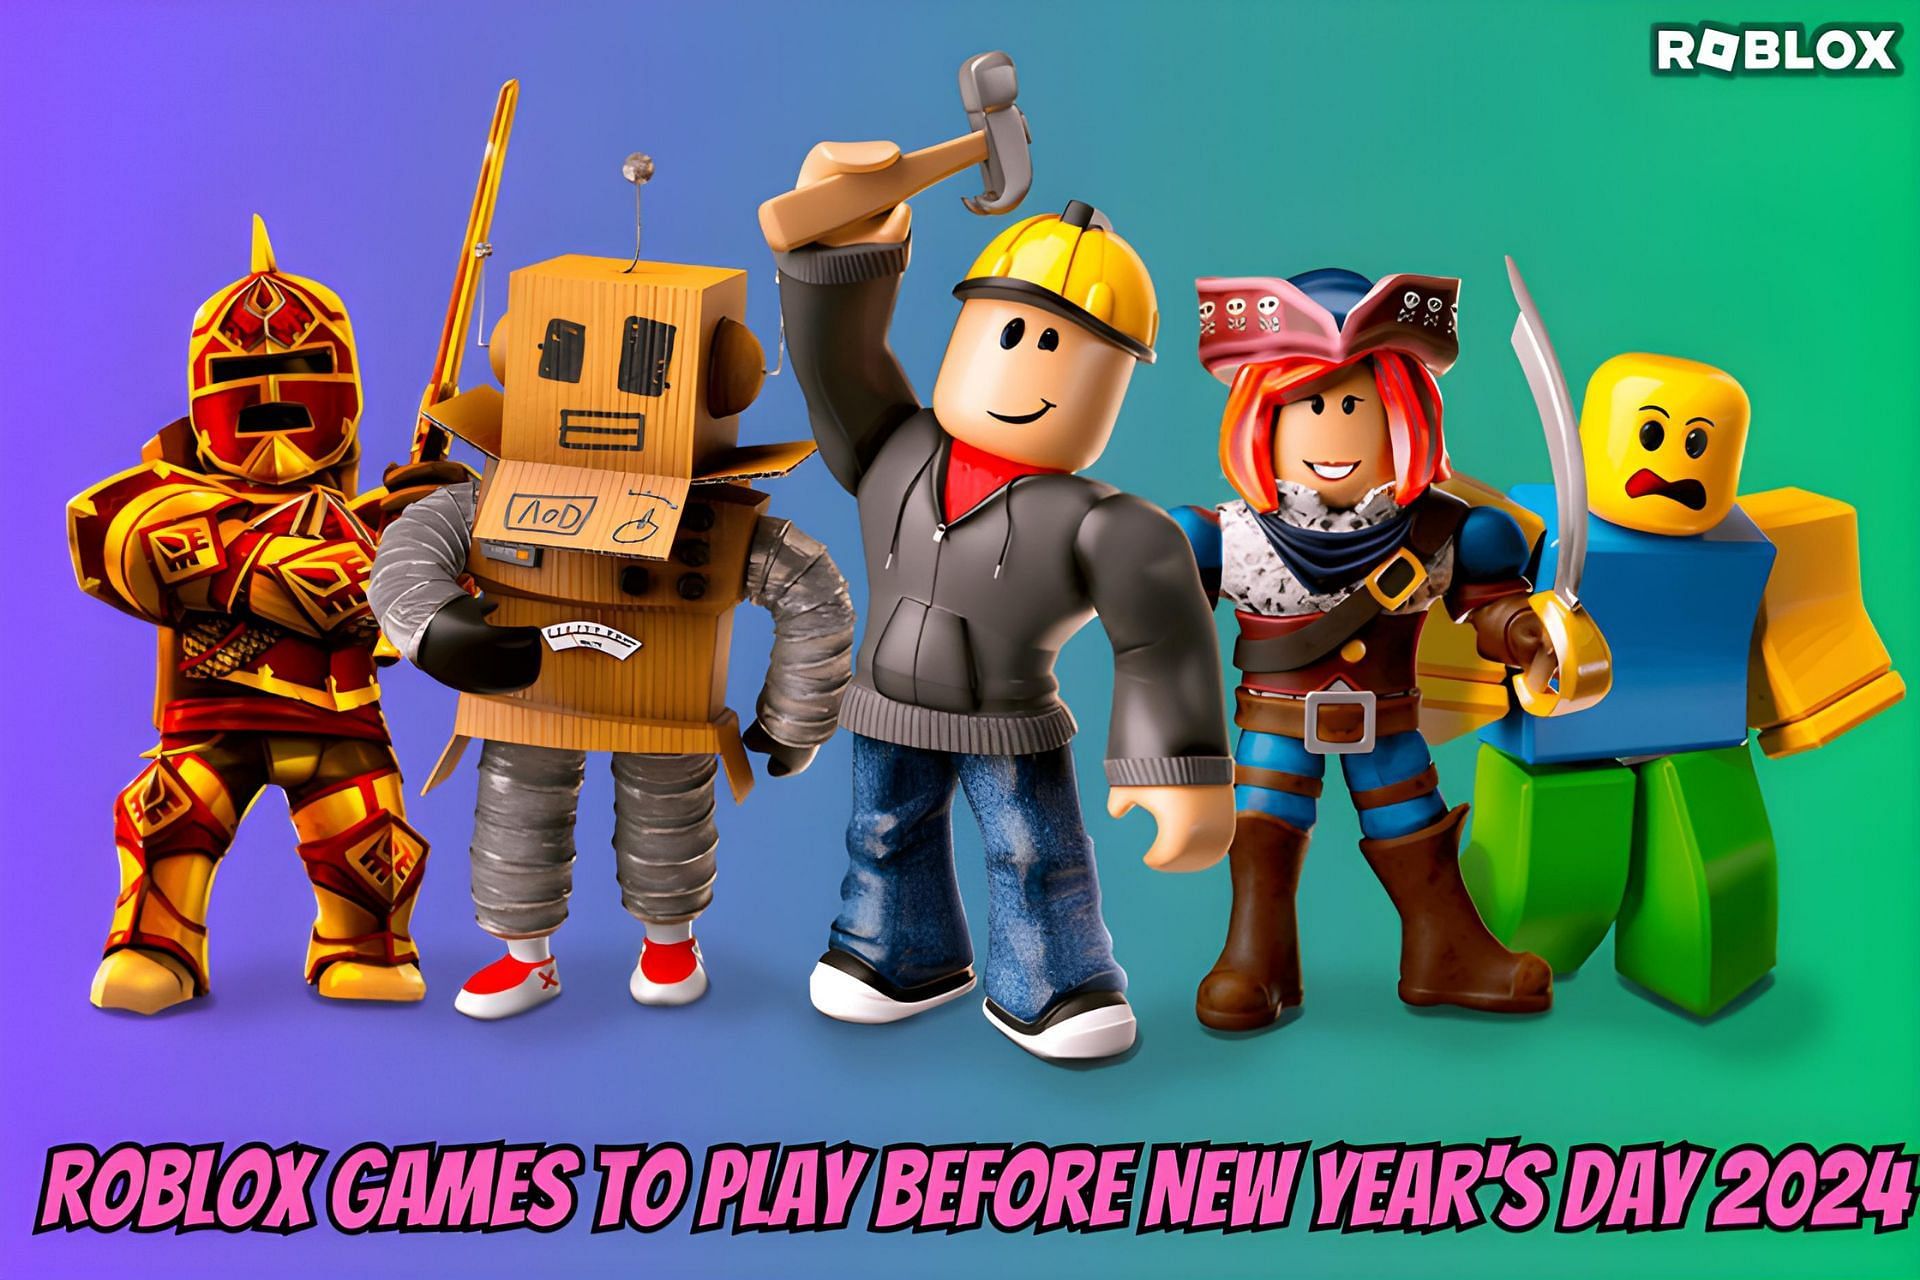 Play before the year ends (Image via Roblox)